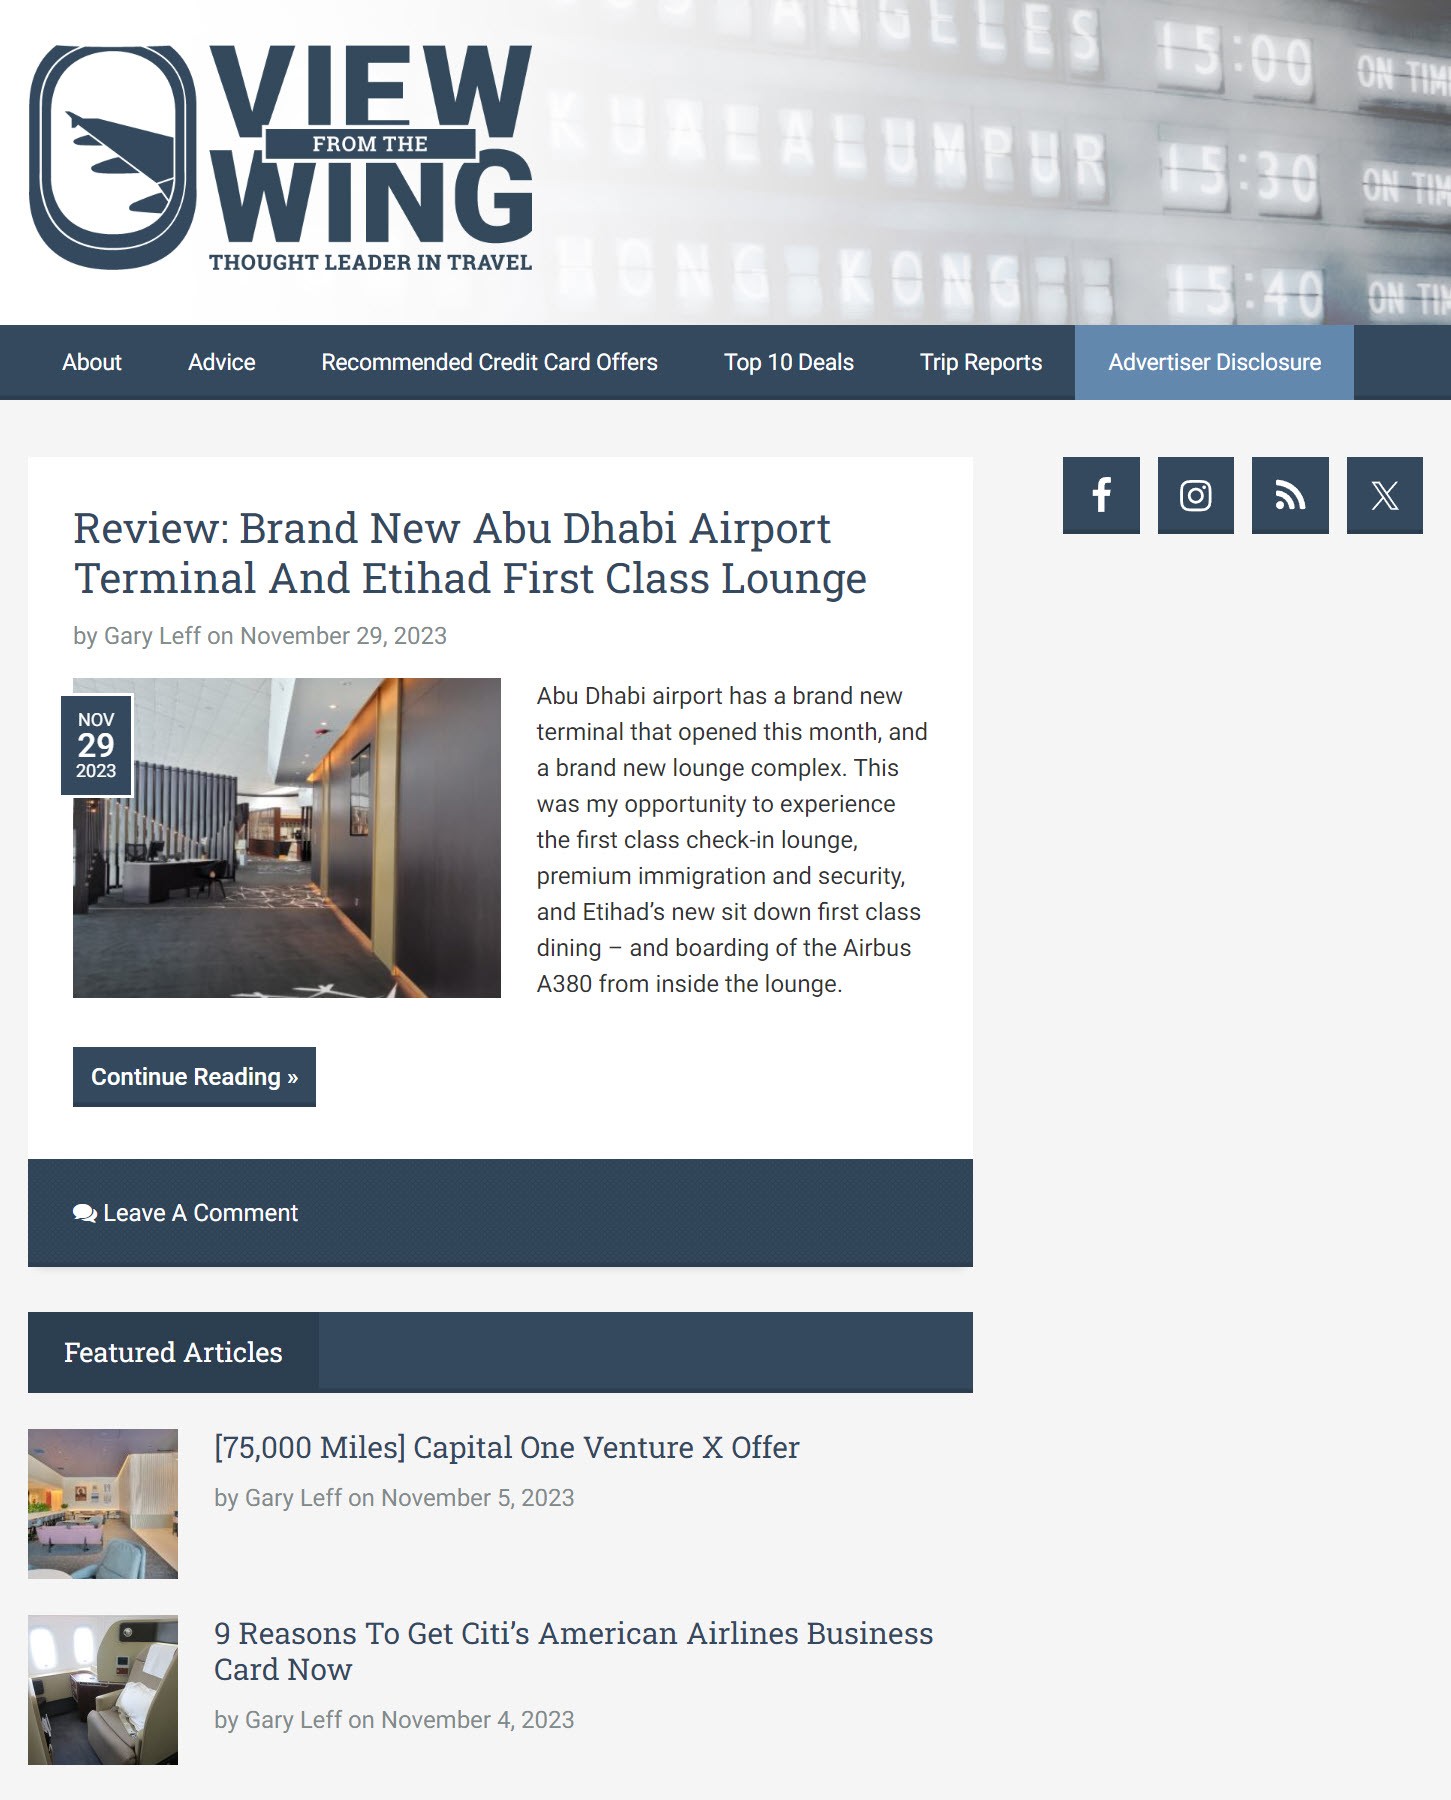 view from the wing homepage